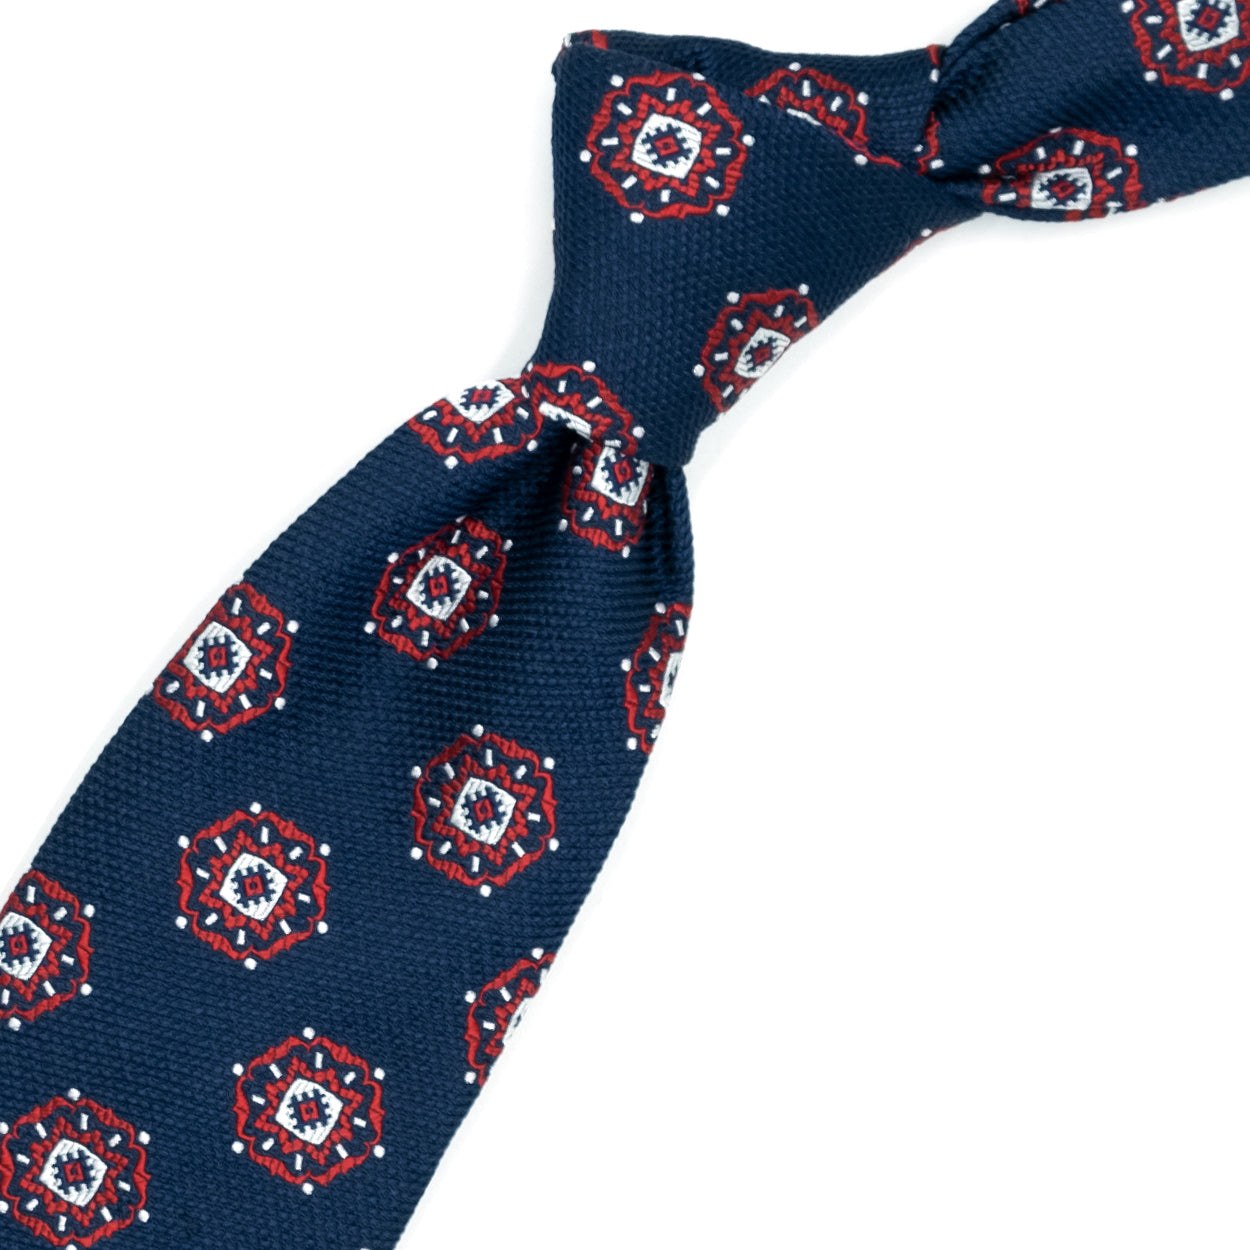 Blue tie with red and white medallions